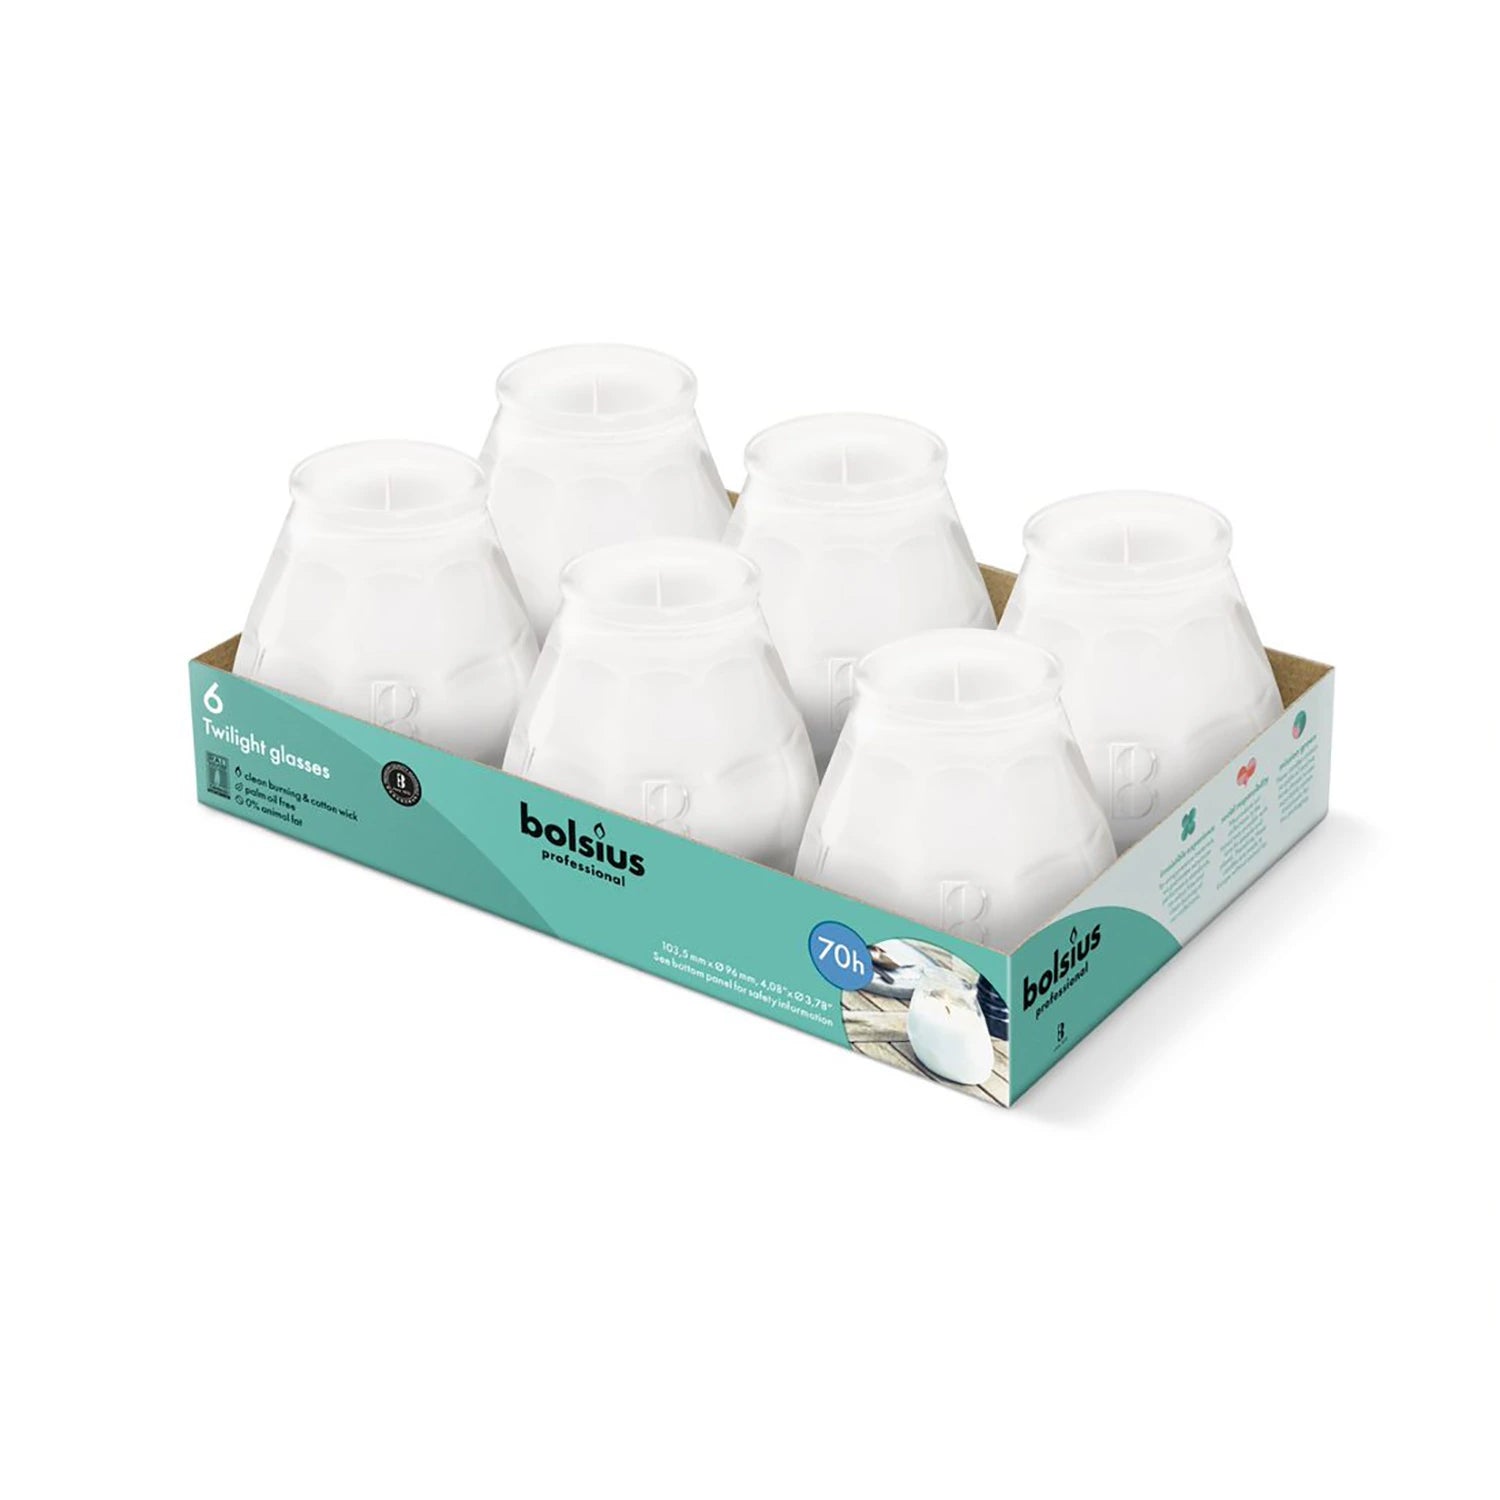 Twilight Lowboy Candles White - Pack of 6